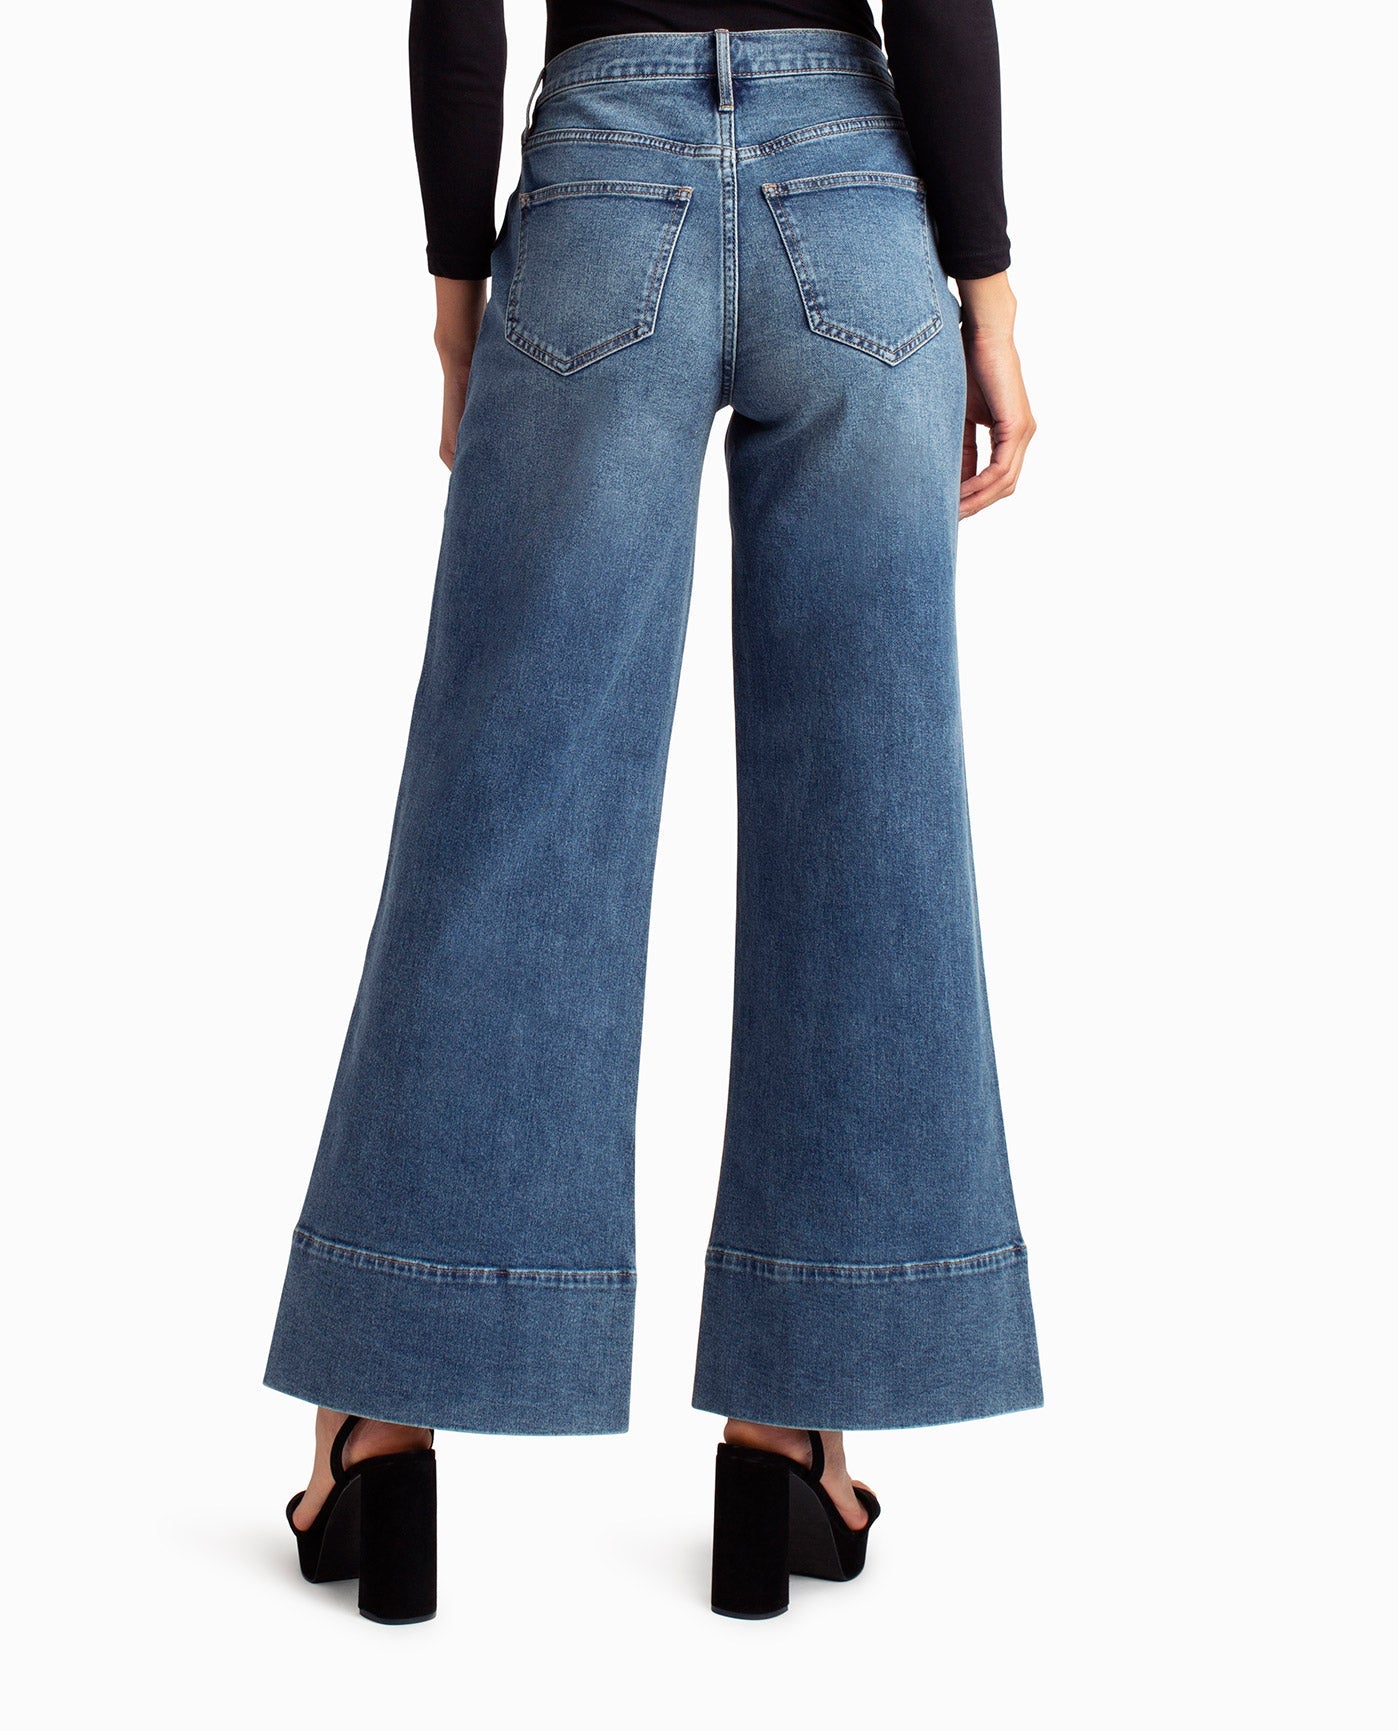 Wide-legged jeans are back